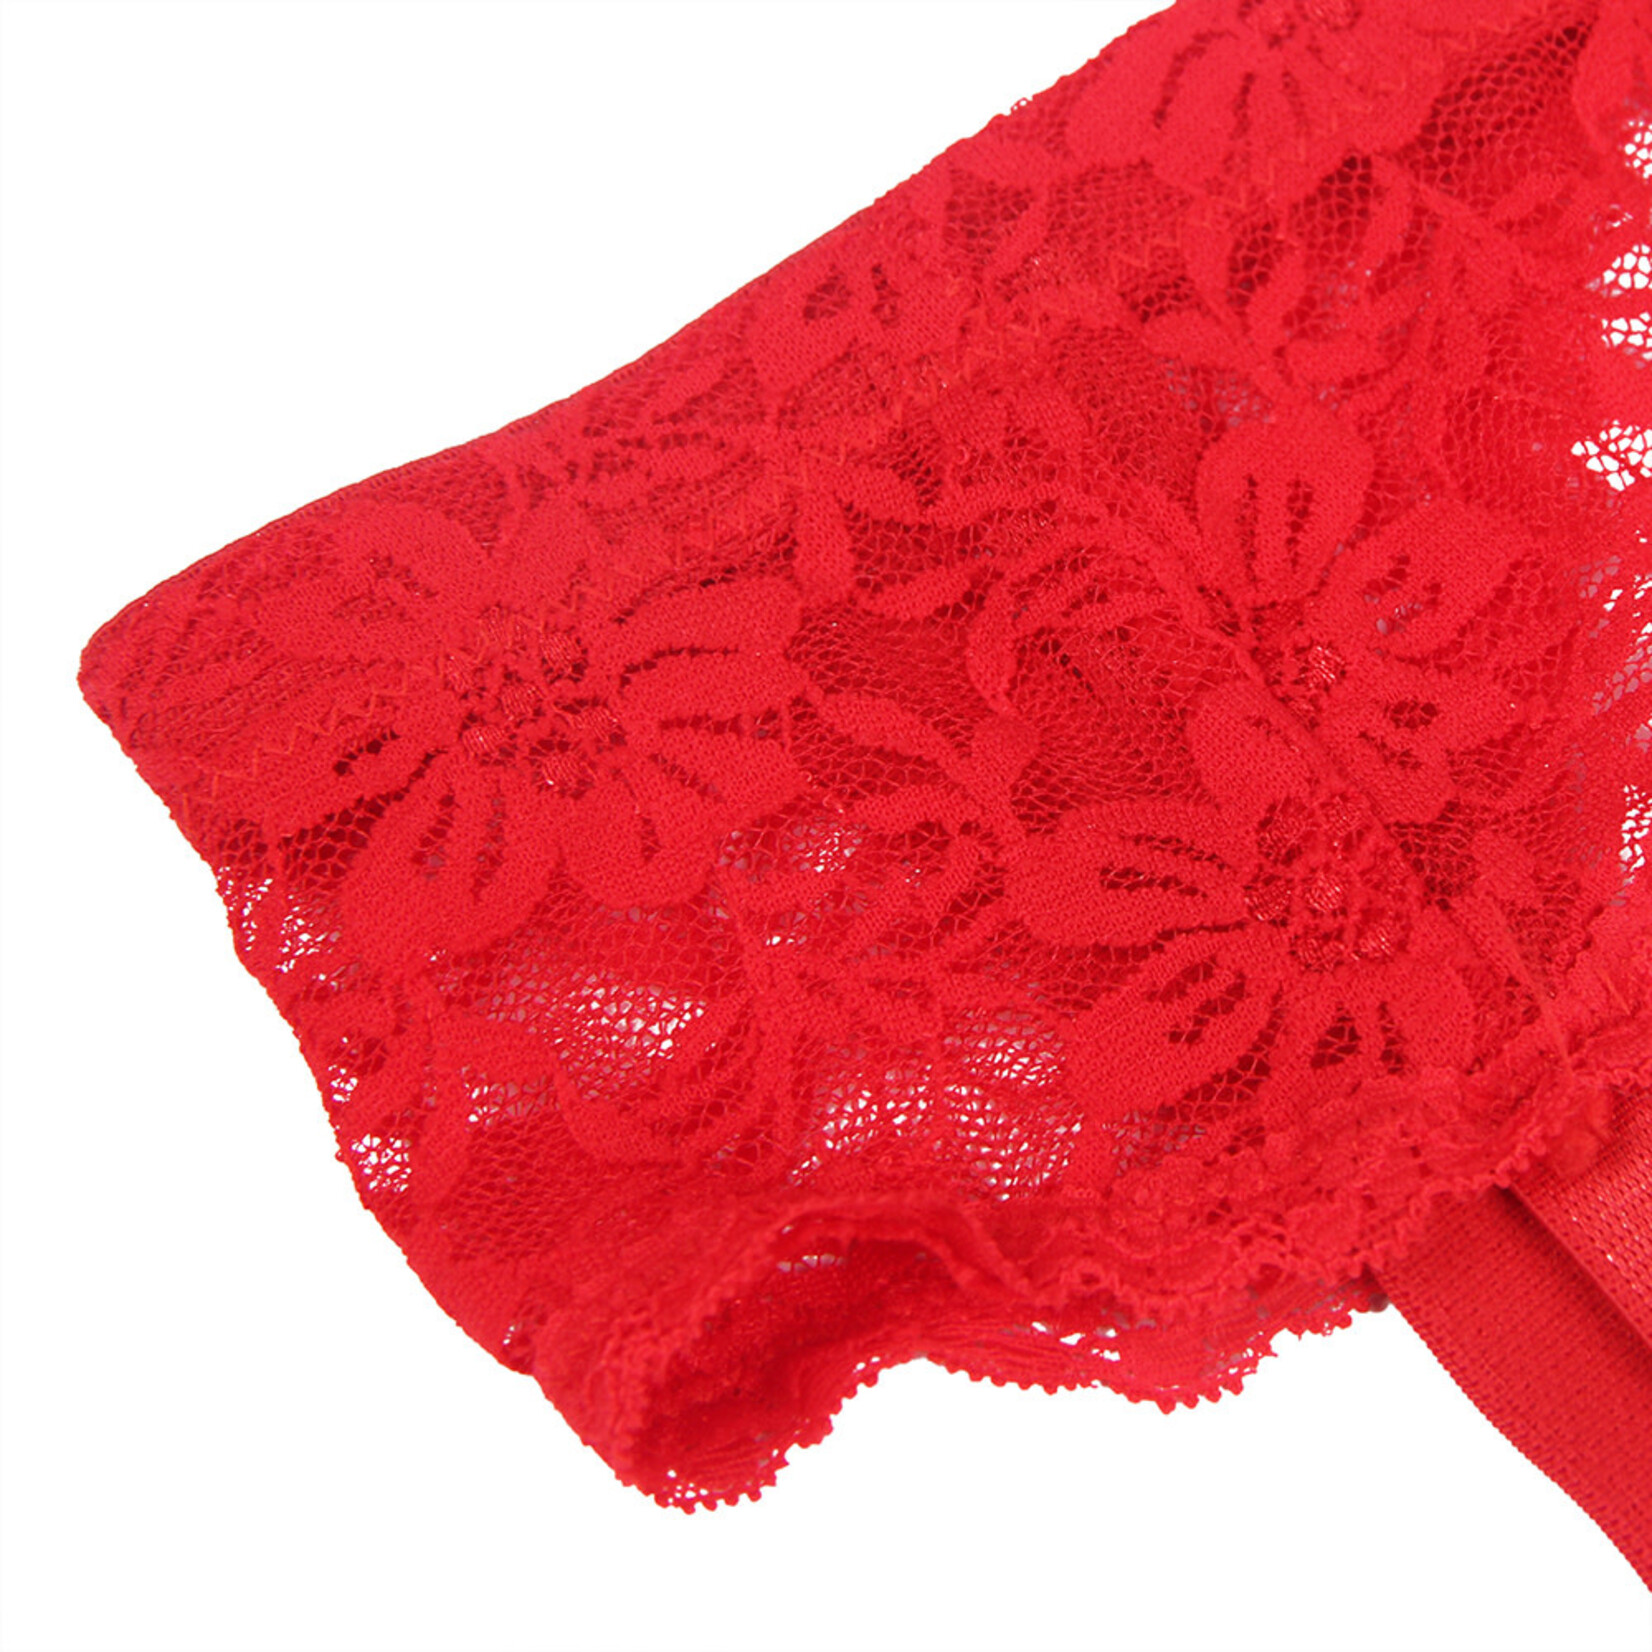 OH YEAH! -  RED LACE METAL BUTTON G STRING PANTIES WITH GARTER BELT XL-2XL